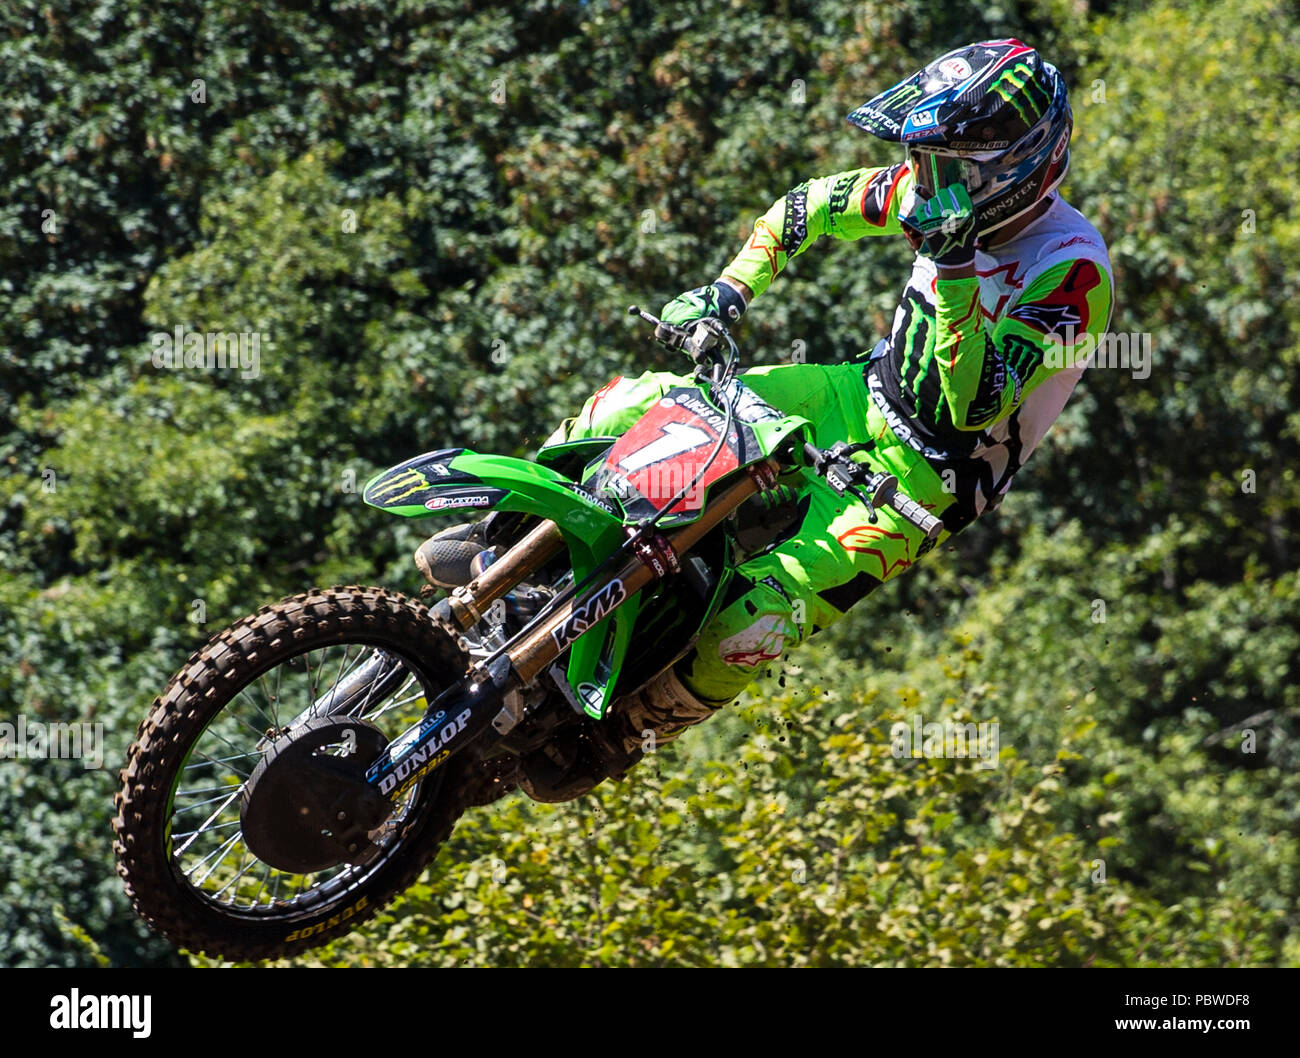 Washougal, WA USA. 28th July, 2018. # 1 Eli Tomac get air coming off of jump 21 during the Lucas Oil Pro Motocross Washougal National 450 class championship at Washougal, WA Thurman James/CSM/Alamy Live News Stock Photo